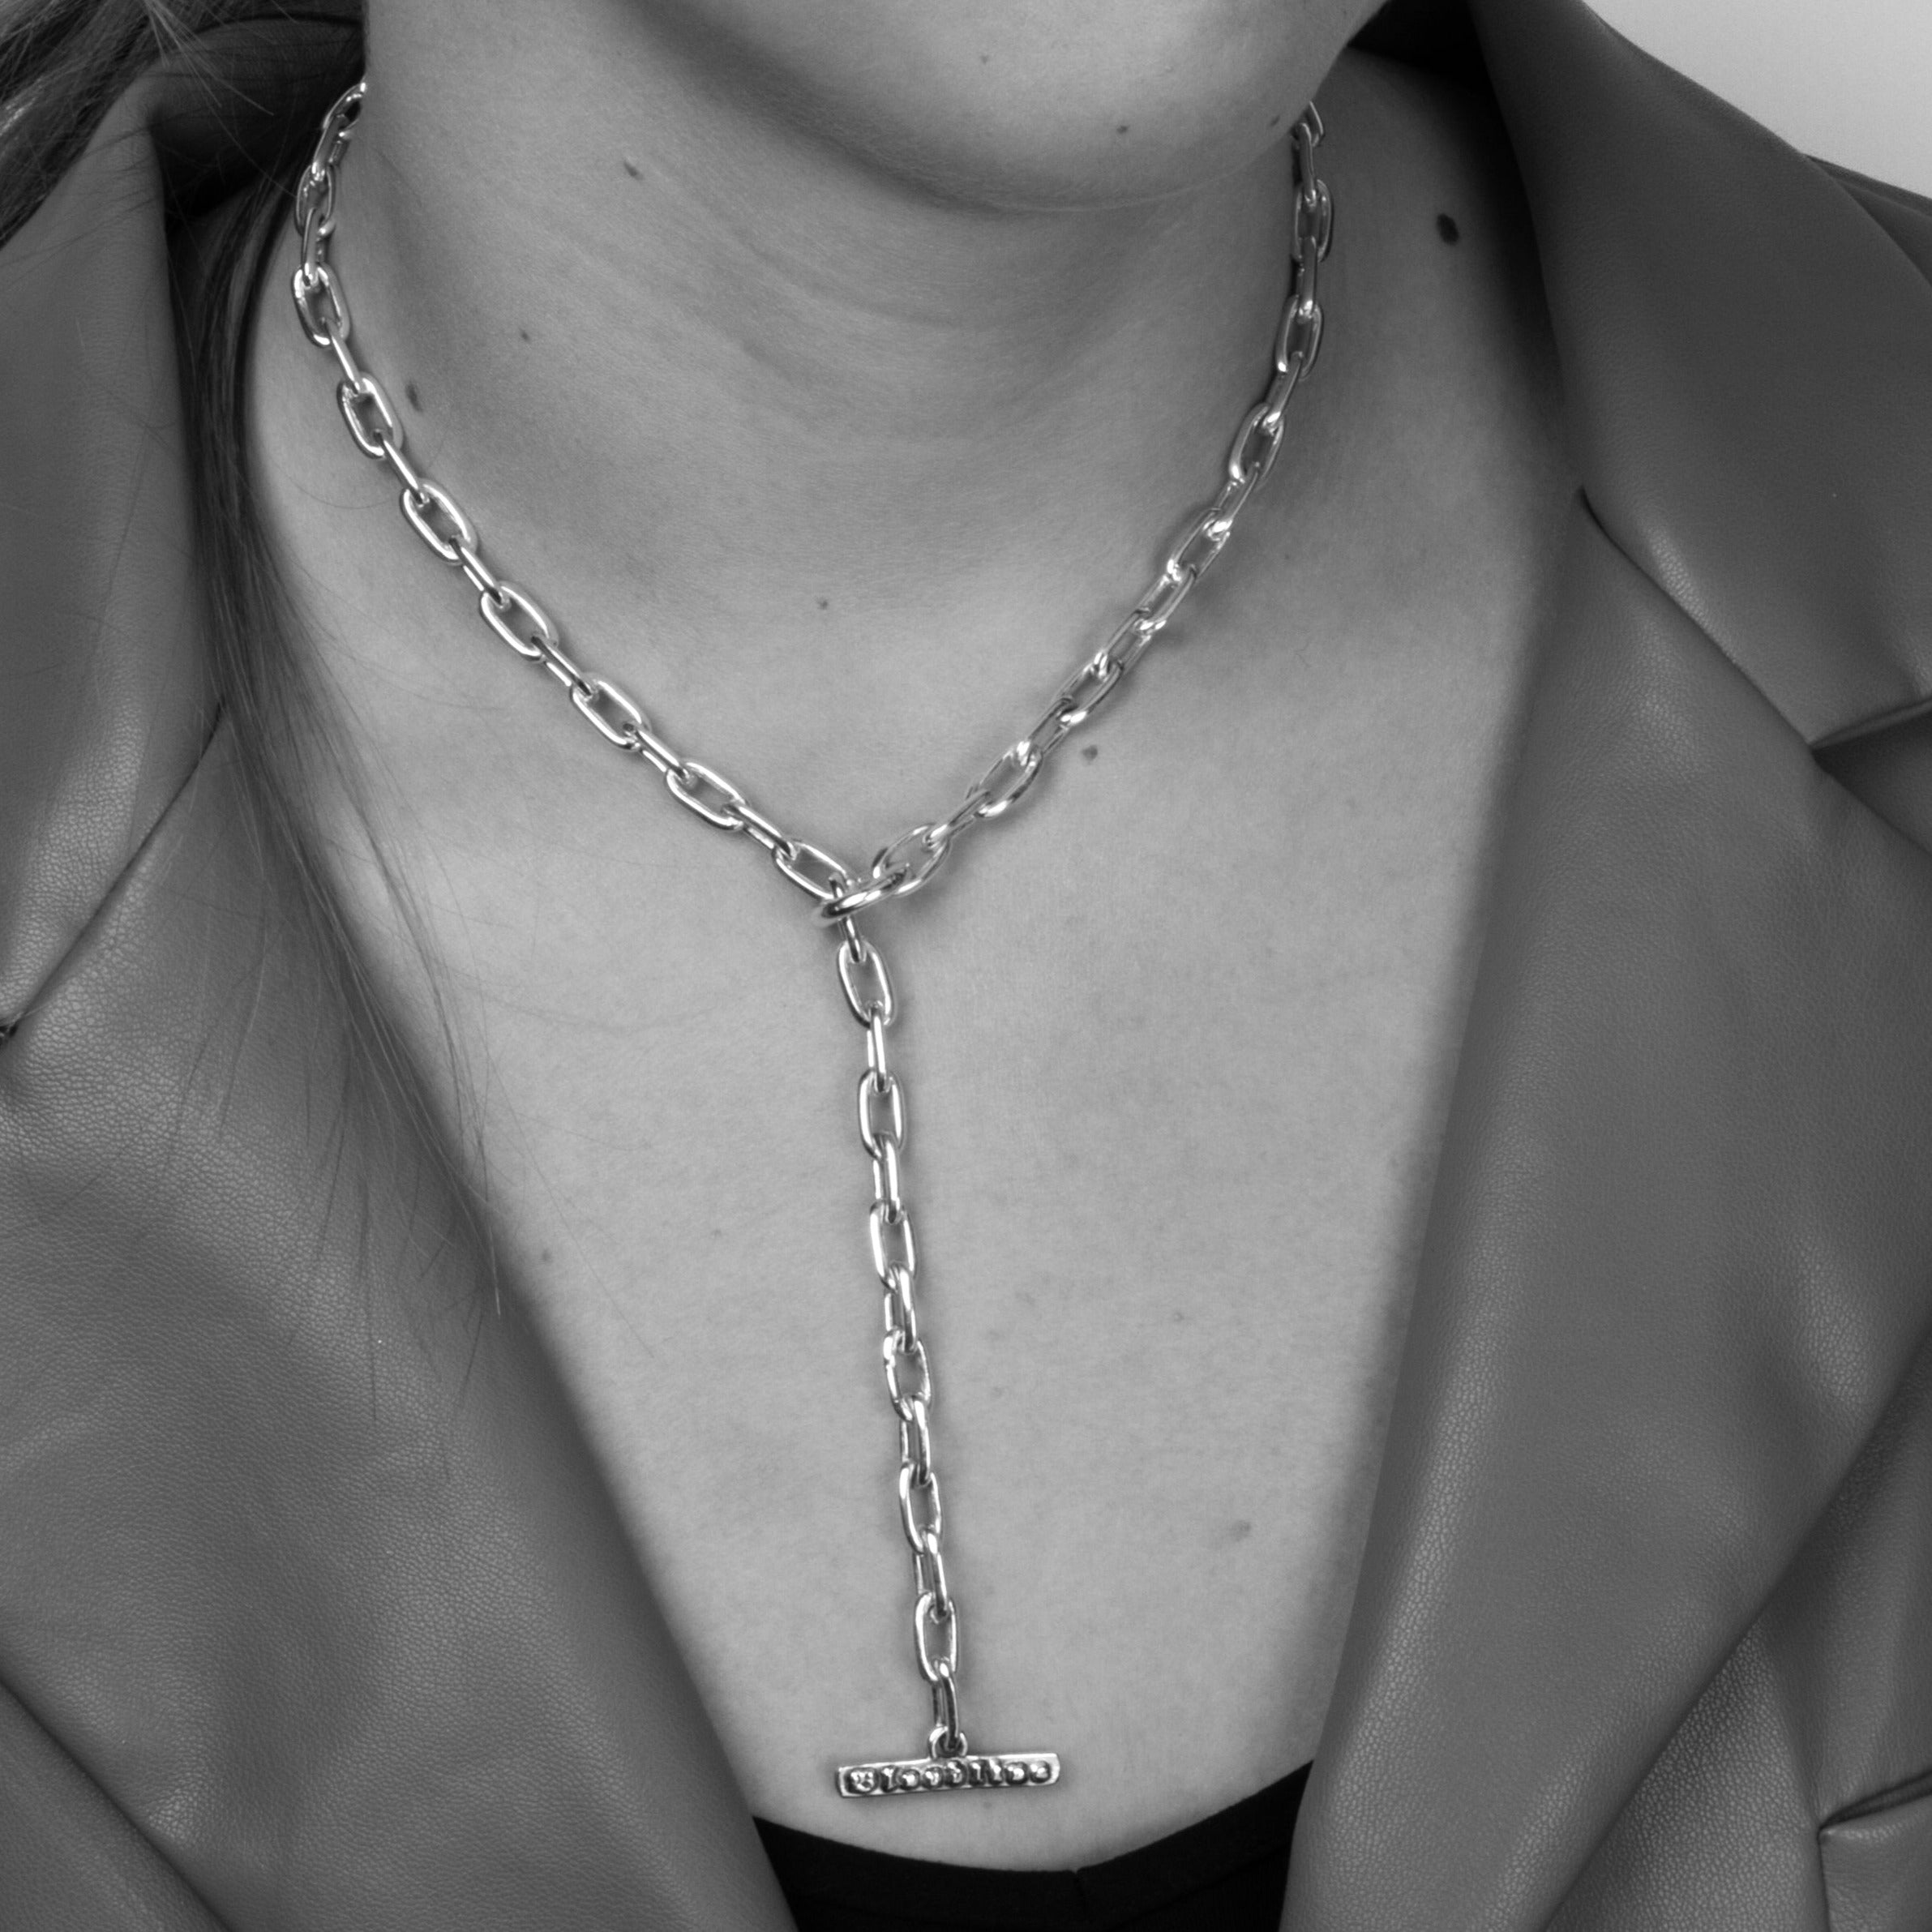 Bloodline Design Canada W-Necklaces The London Link Chain shown on a model